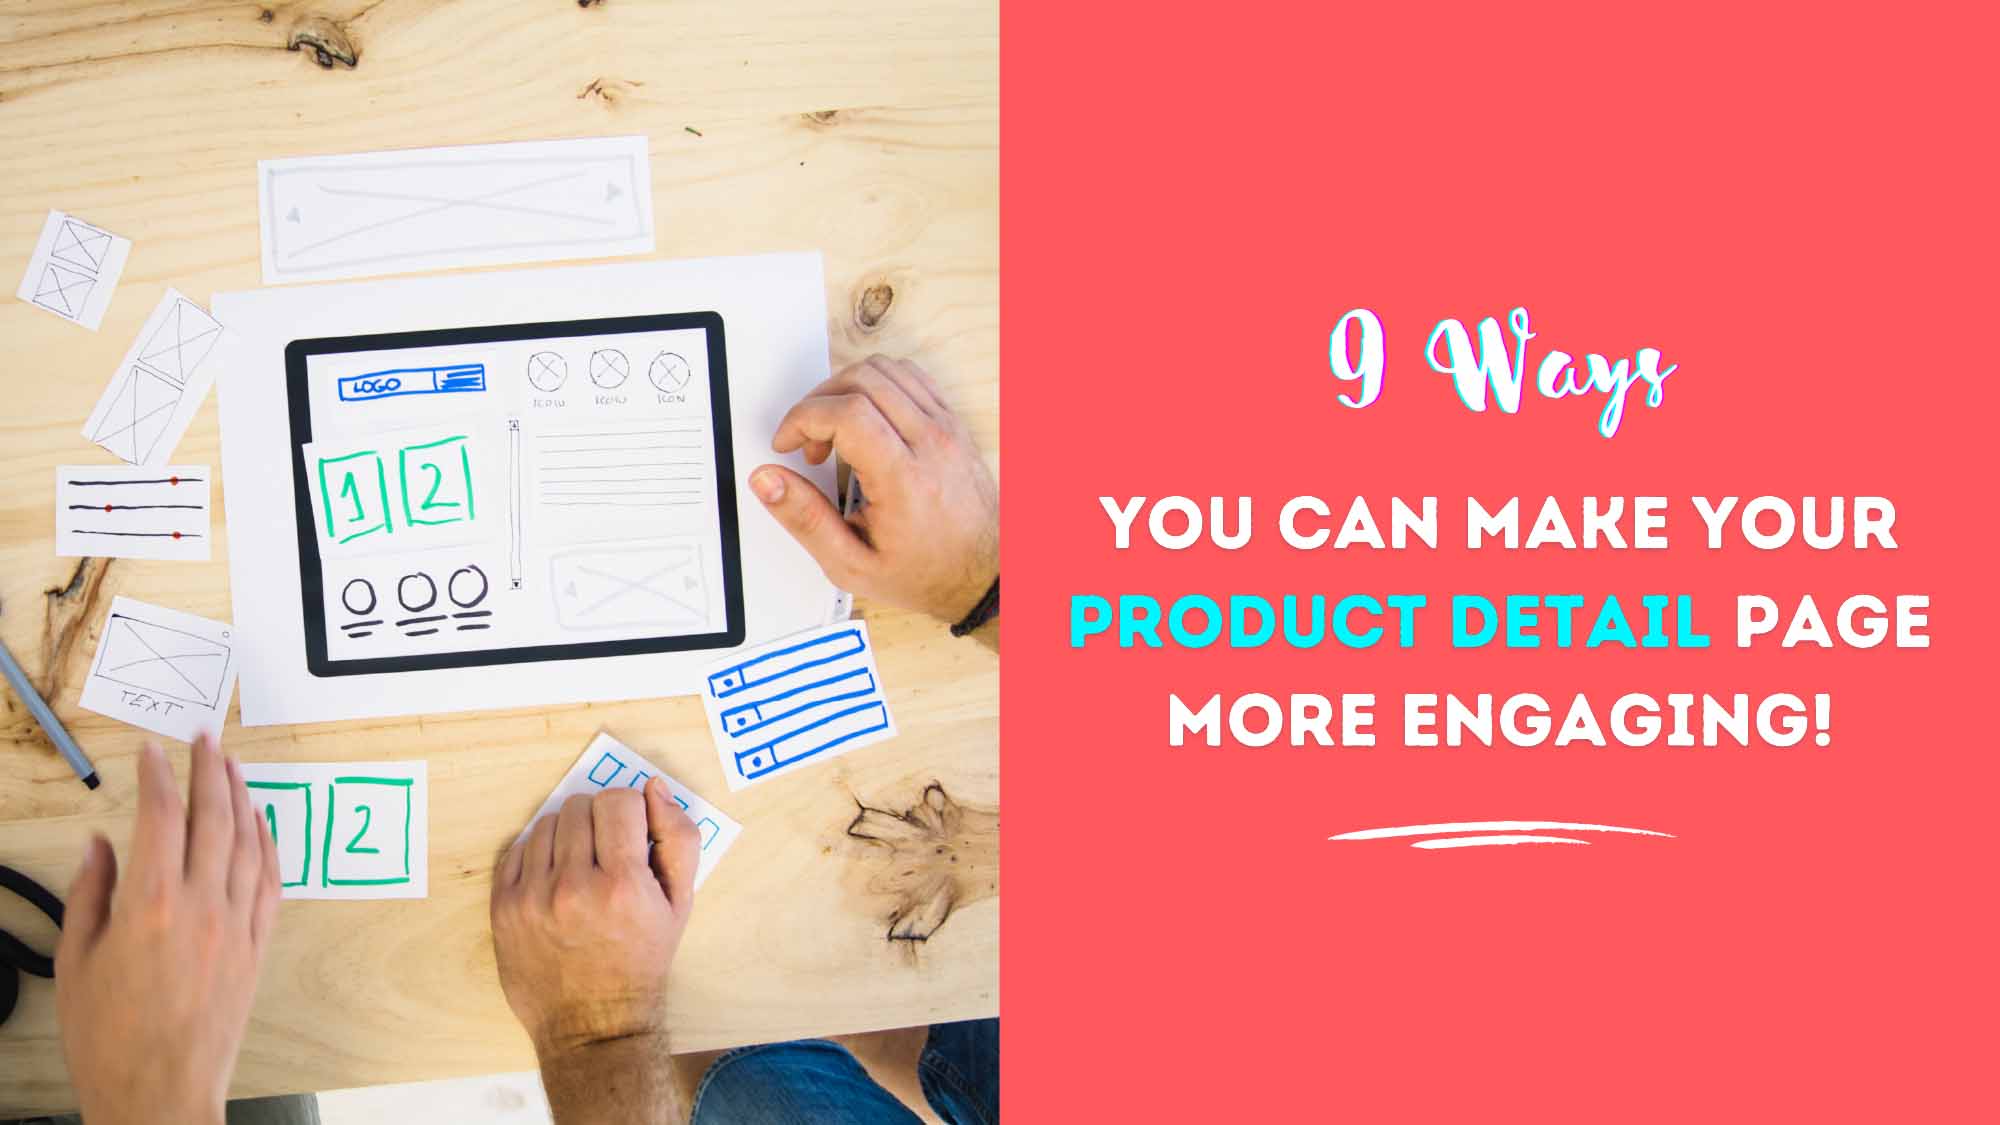 9 Ways You Can Make Your Product Detail Page More Engaging!